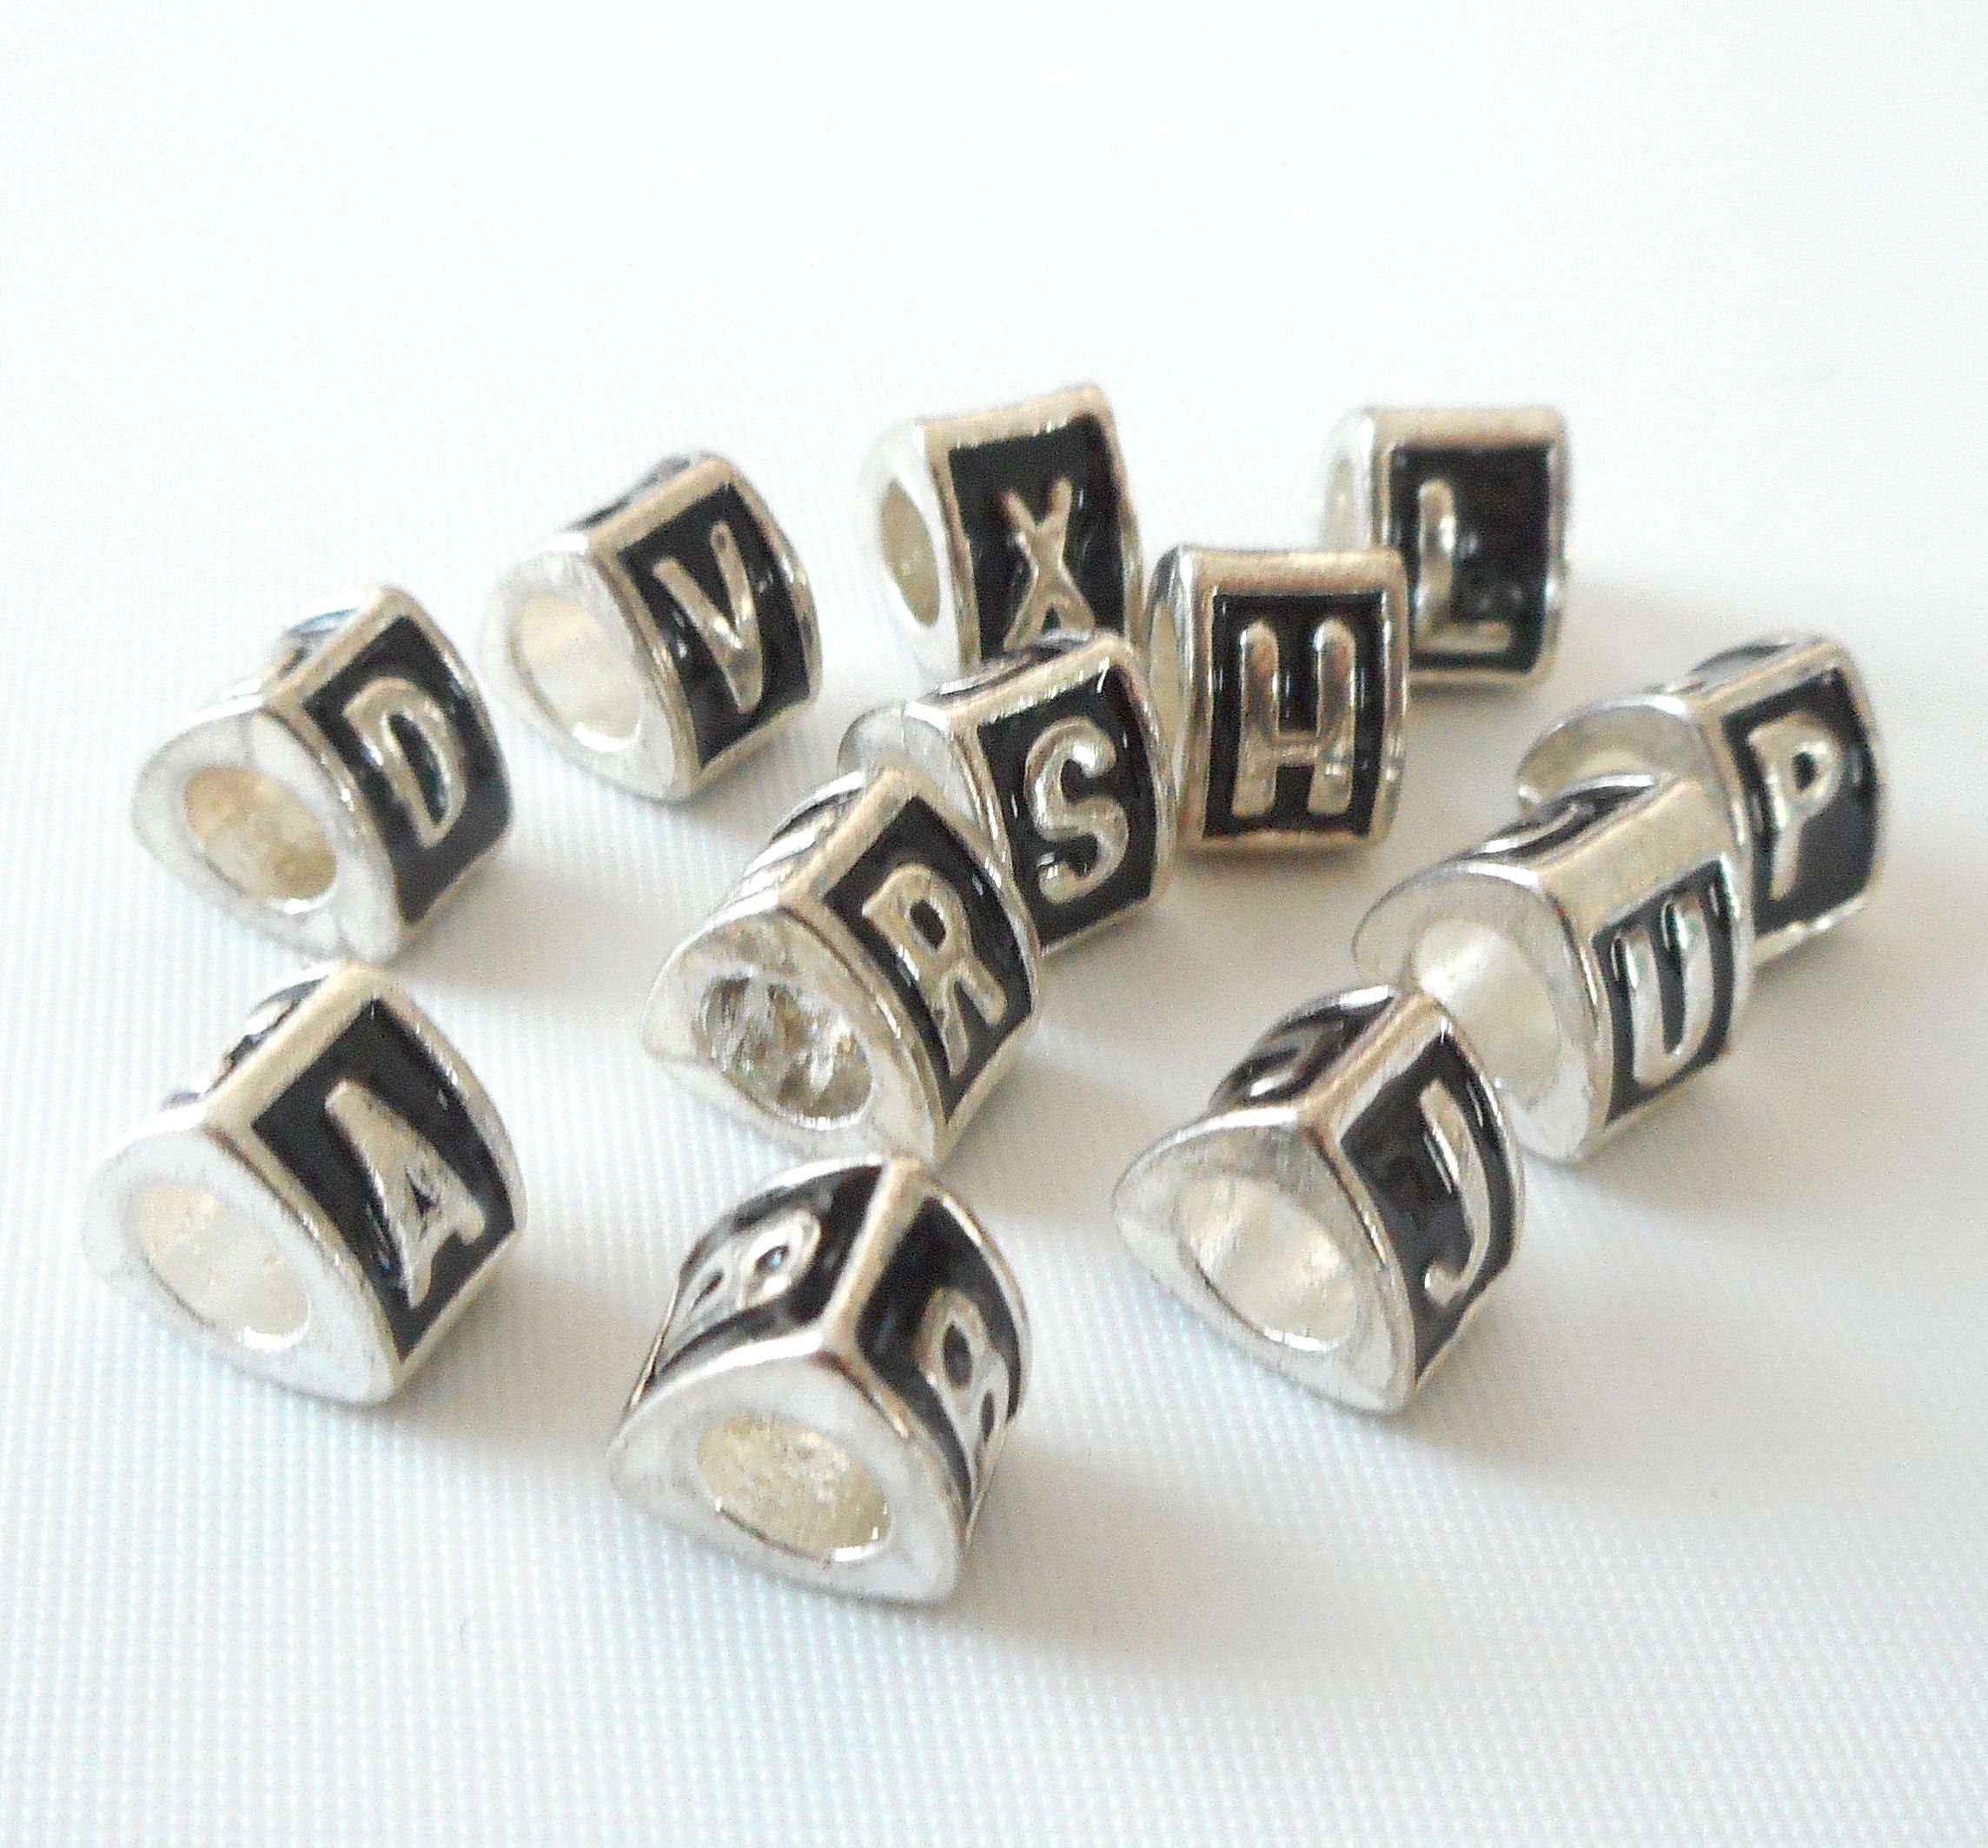 Pick Letter-26 Alphabet Letters-3 Sides Antique Silver Charm beads,big Hole Metal Beads